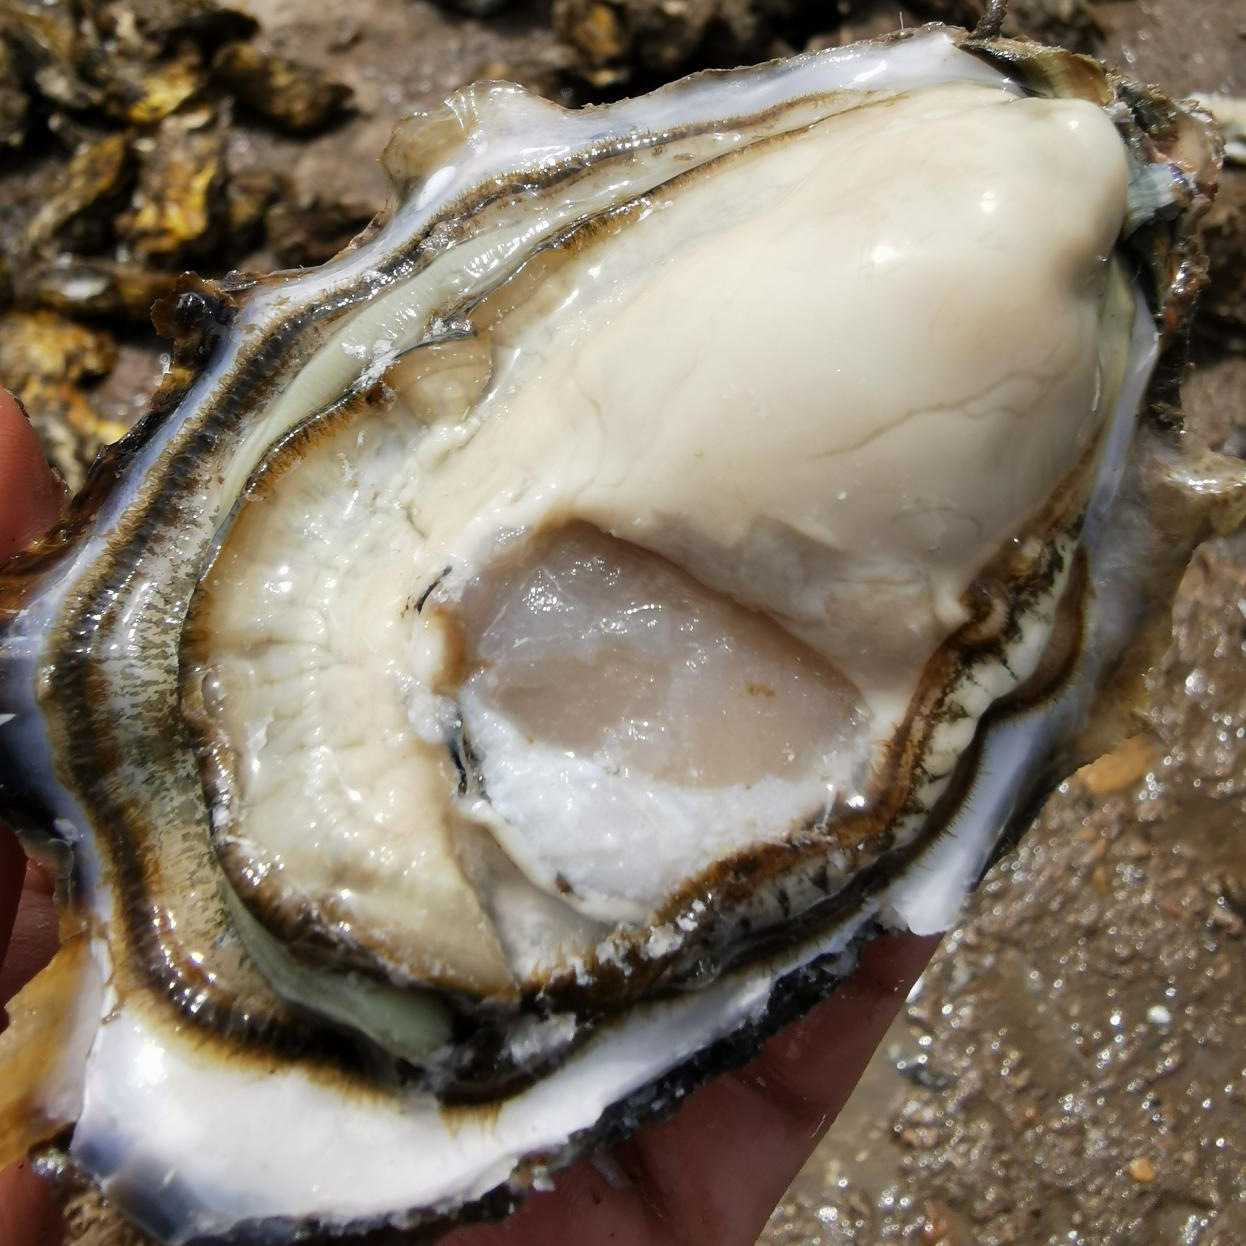 Shandong fresh Oyster 5 Shunfeng Straight hair Fresh Oyster Seafood Aquatic products Oyster Group purchase On behalf of